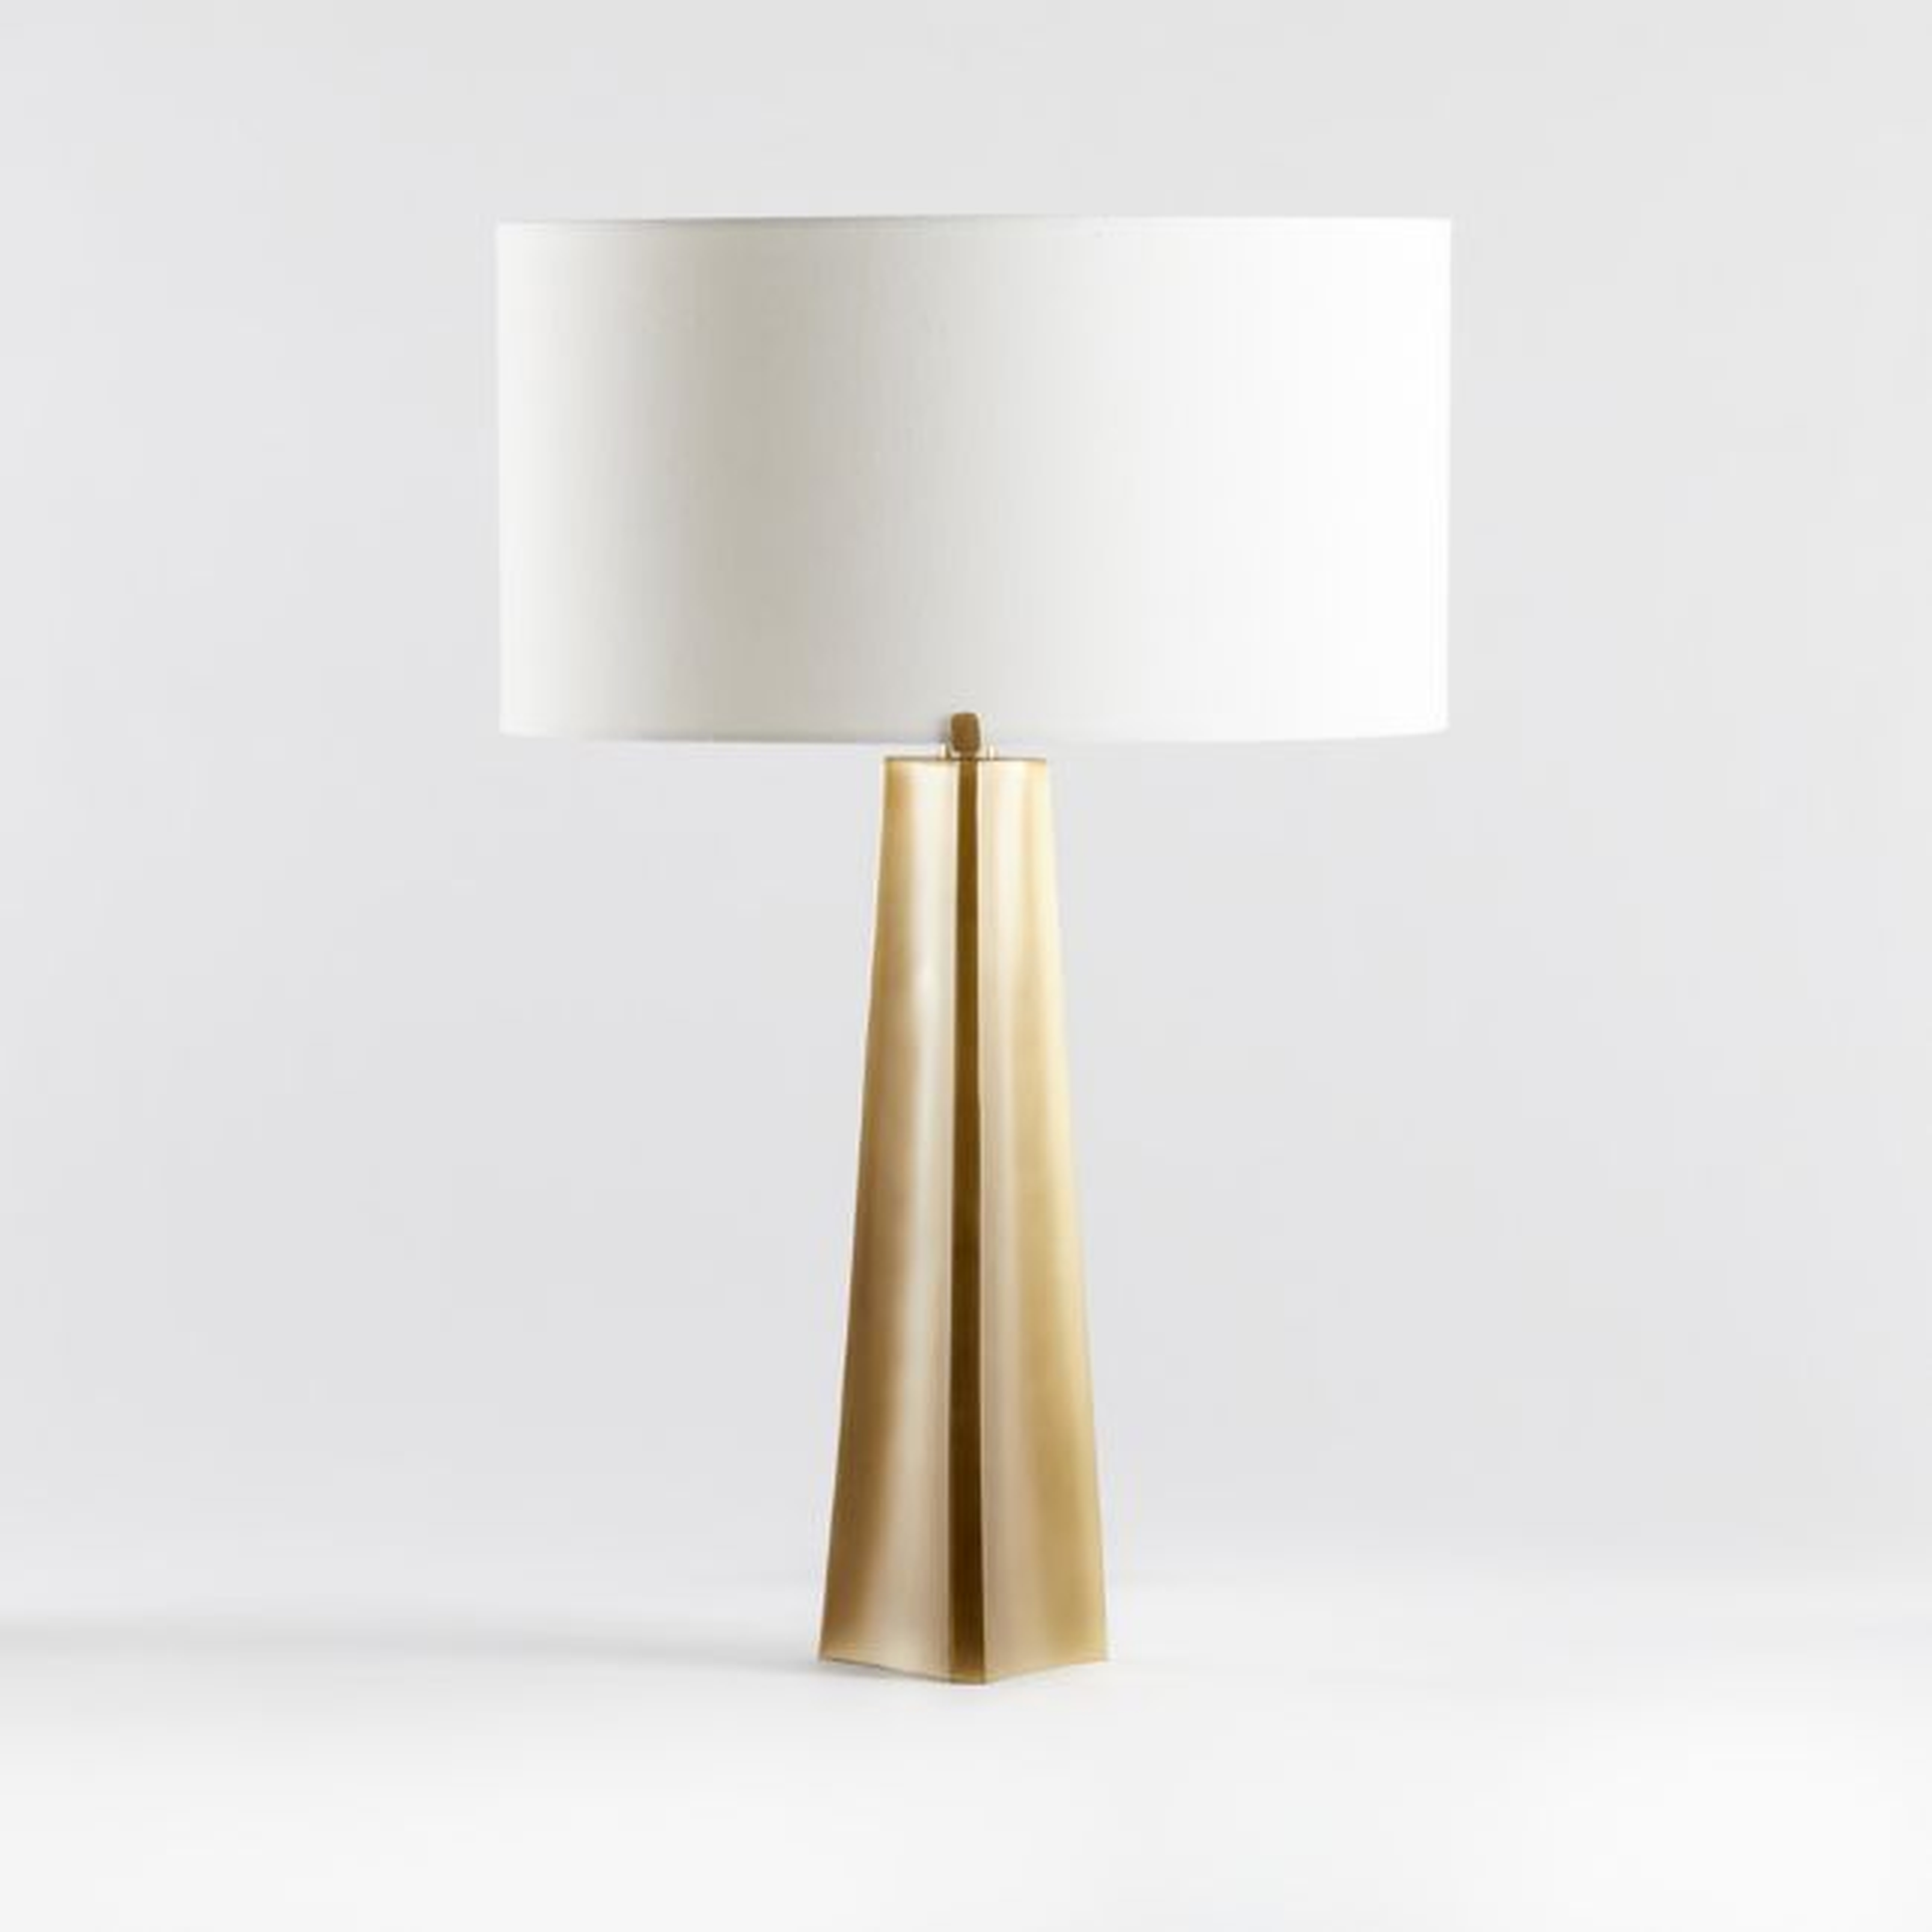 Isla Brass Triangle Table Lamp, Set of 2 - Crate and Barrel